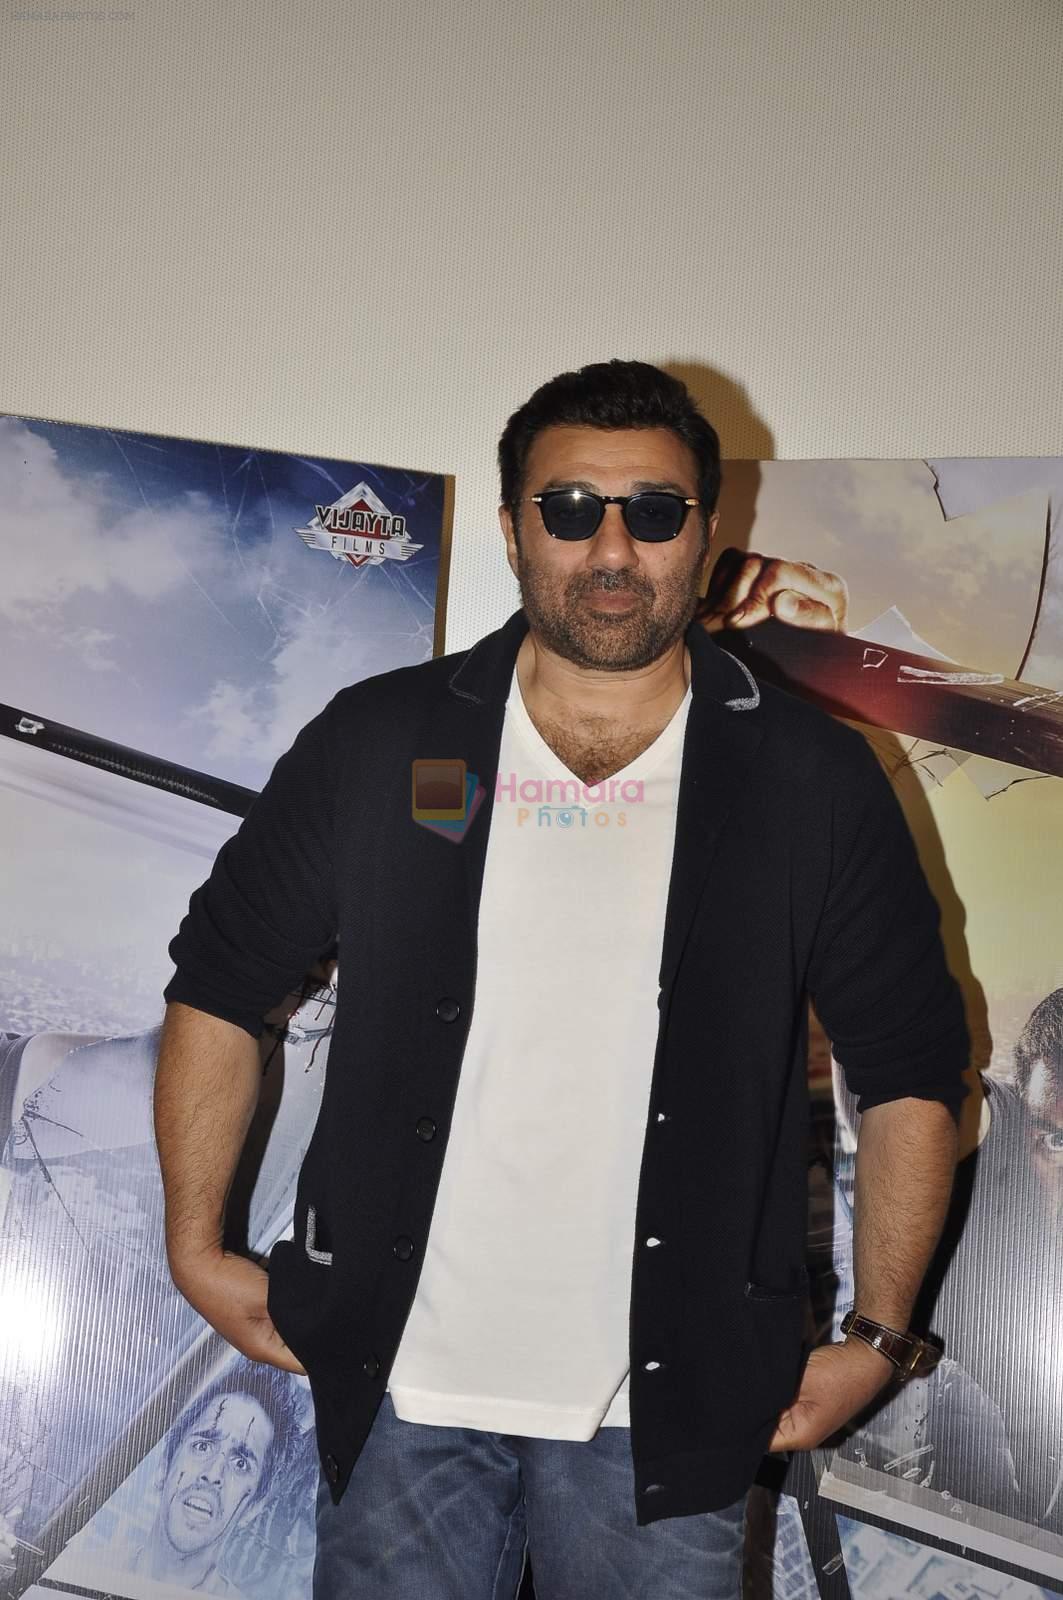 Sunny Deol at Ghayal Once again promotions on 21st Jan 2016